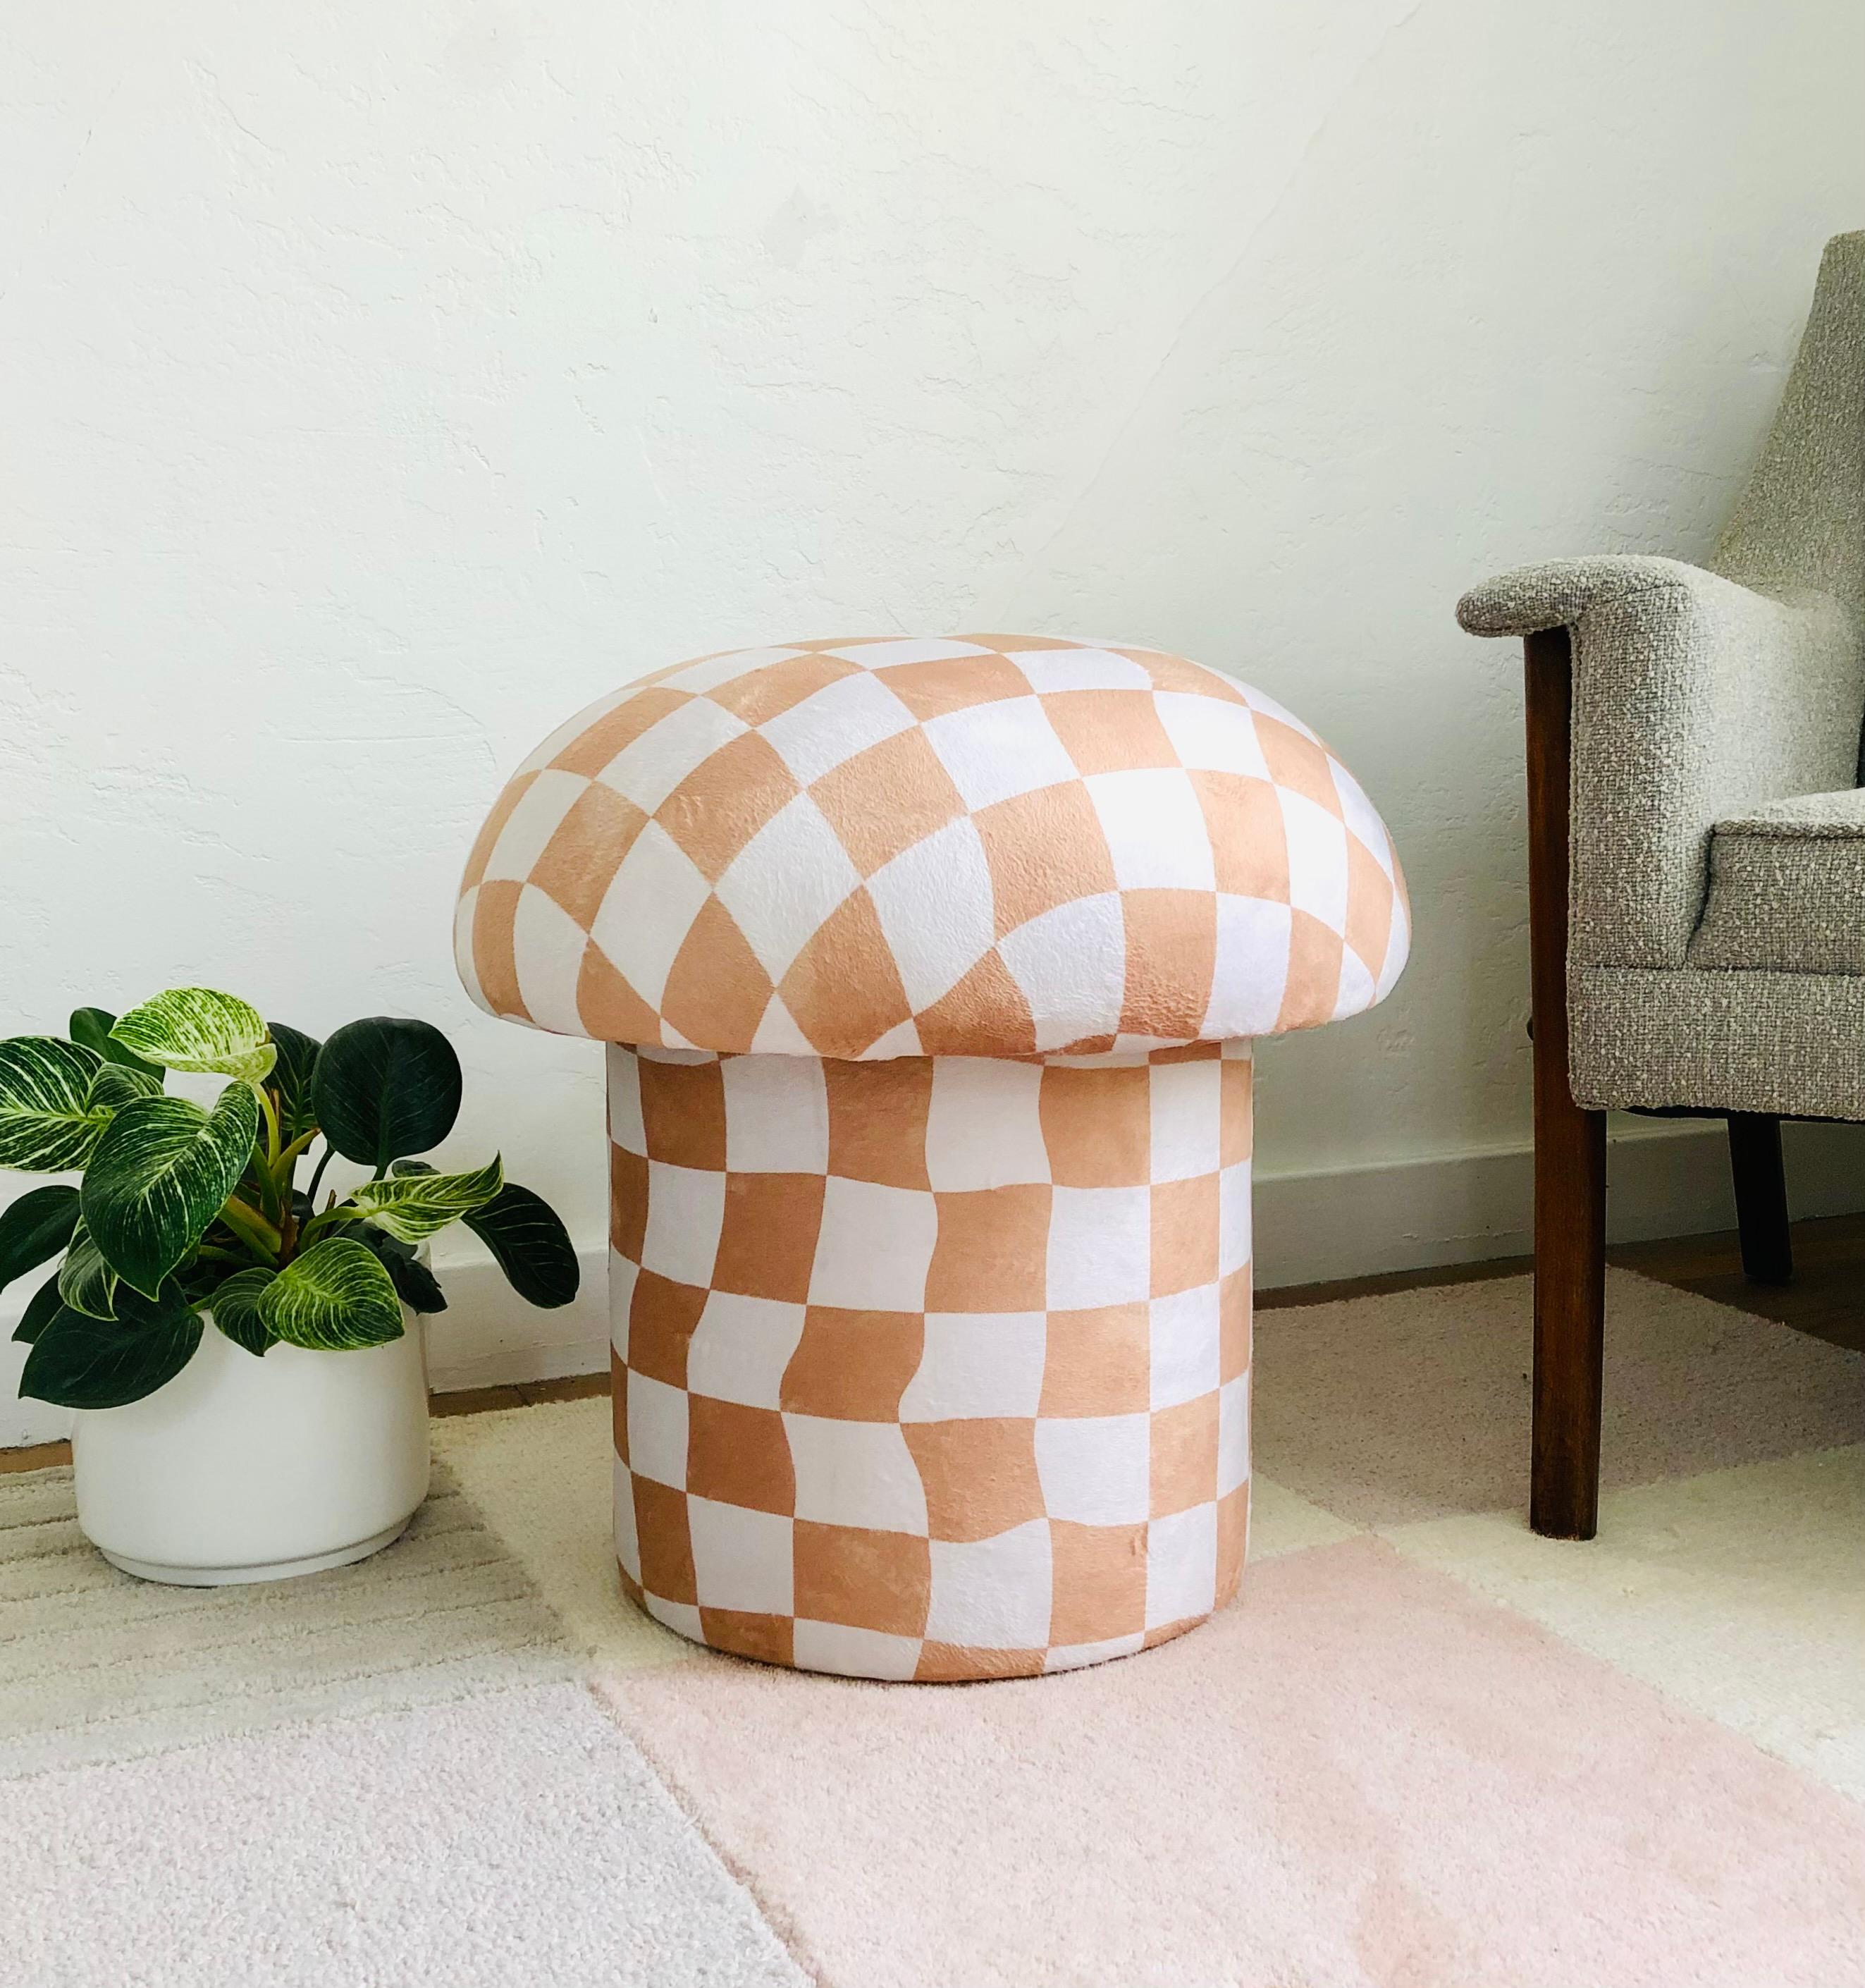 A handmade mushroom shaped ottoman, upholstered in a white and tan warped checkerboard velvet fabric. Perfect for using as a footstool or extra occasional seating. A comfortable cushioned seat and sculptural accent piece.
Mushroom ottomans are made